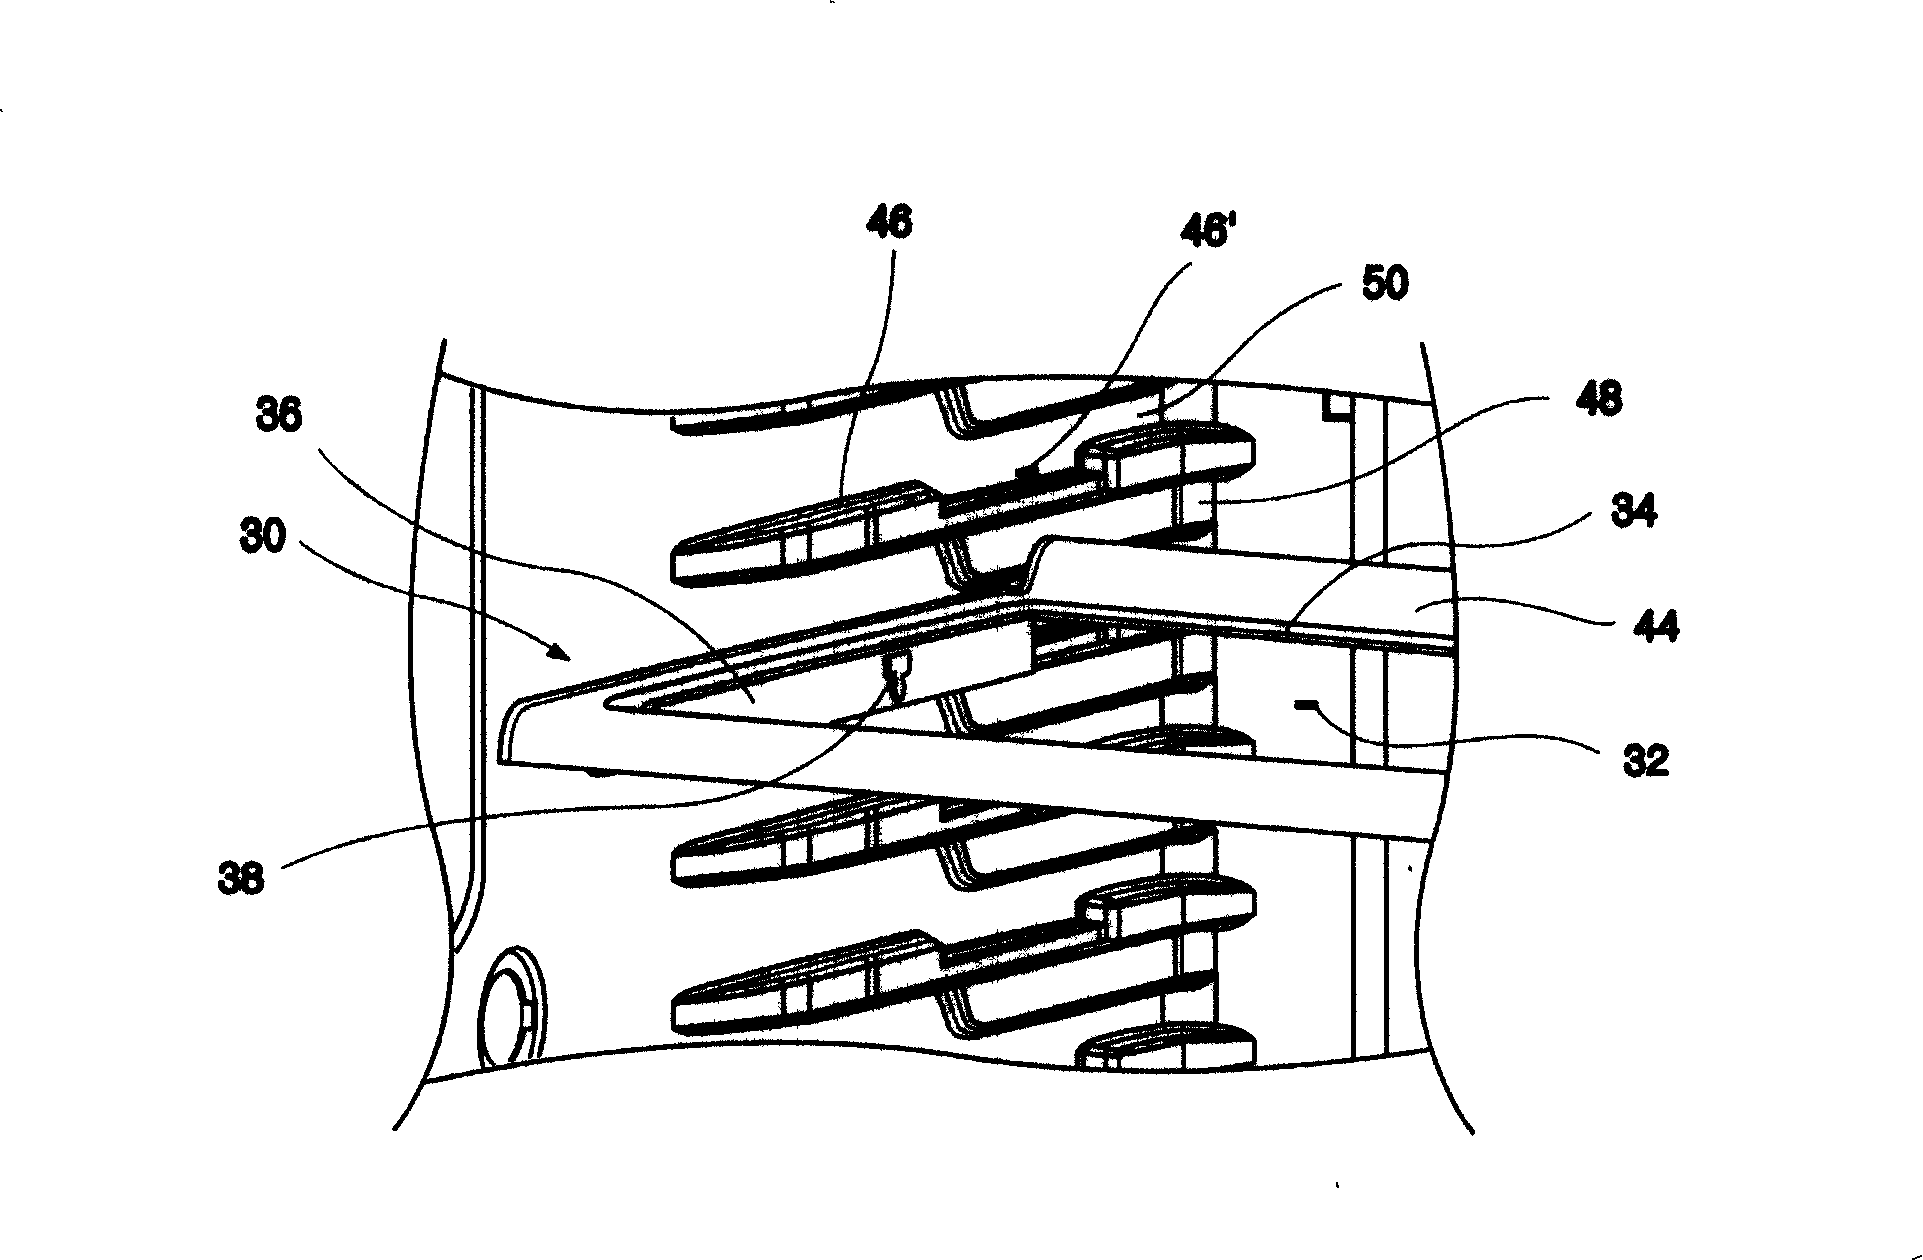 Installation structure of shelf assembly for refrigerator